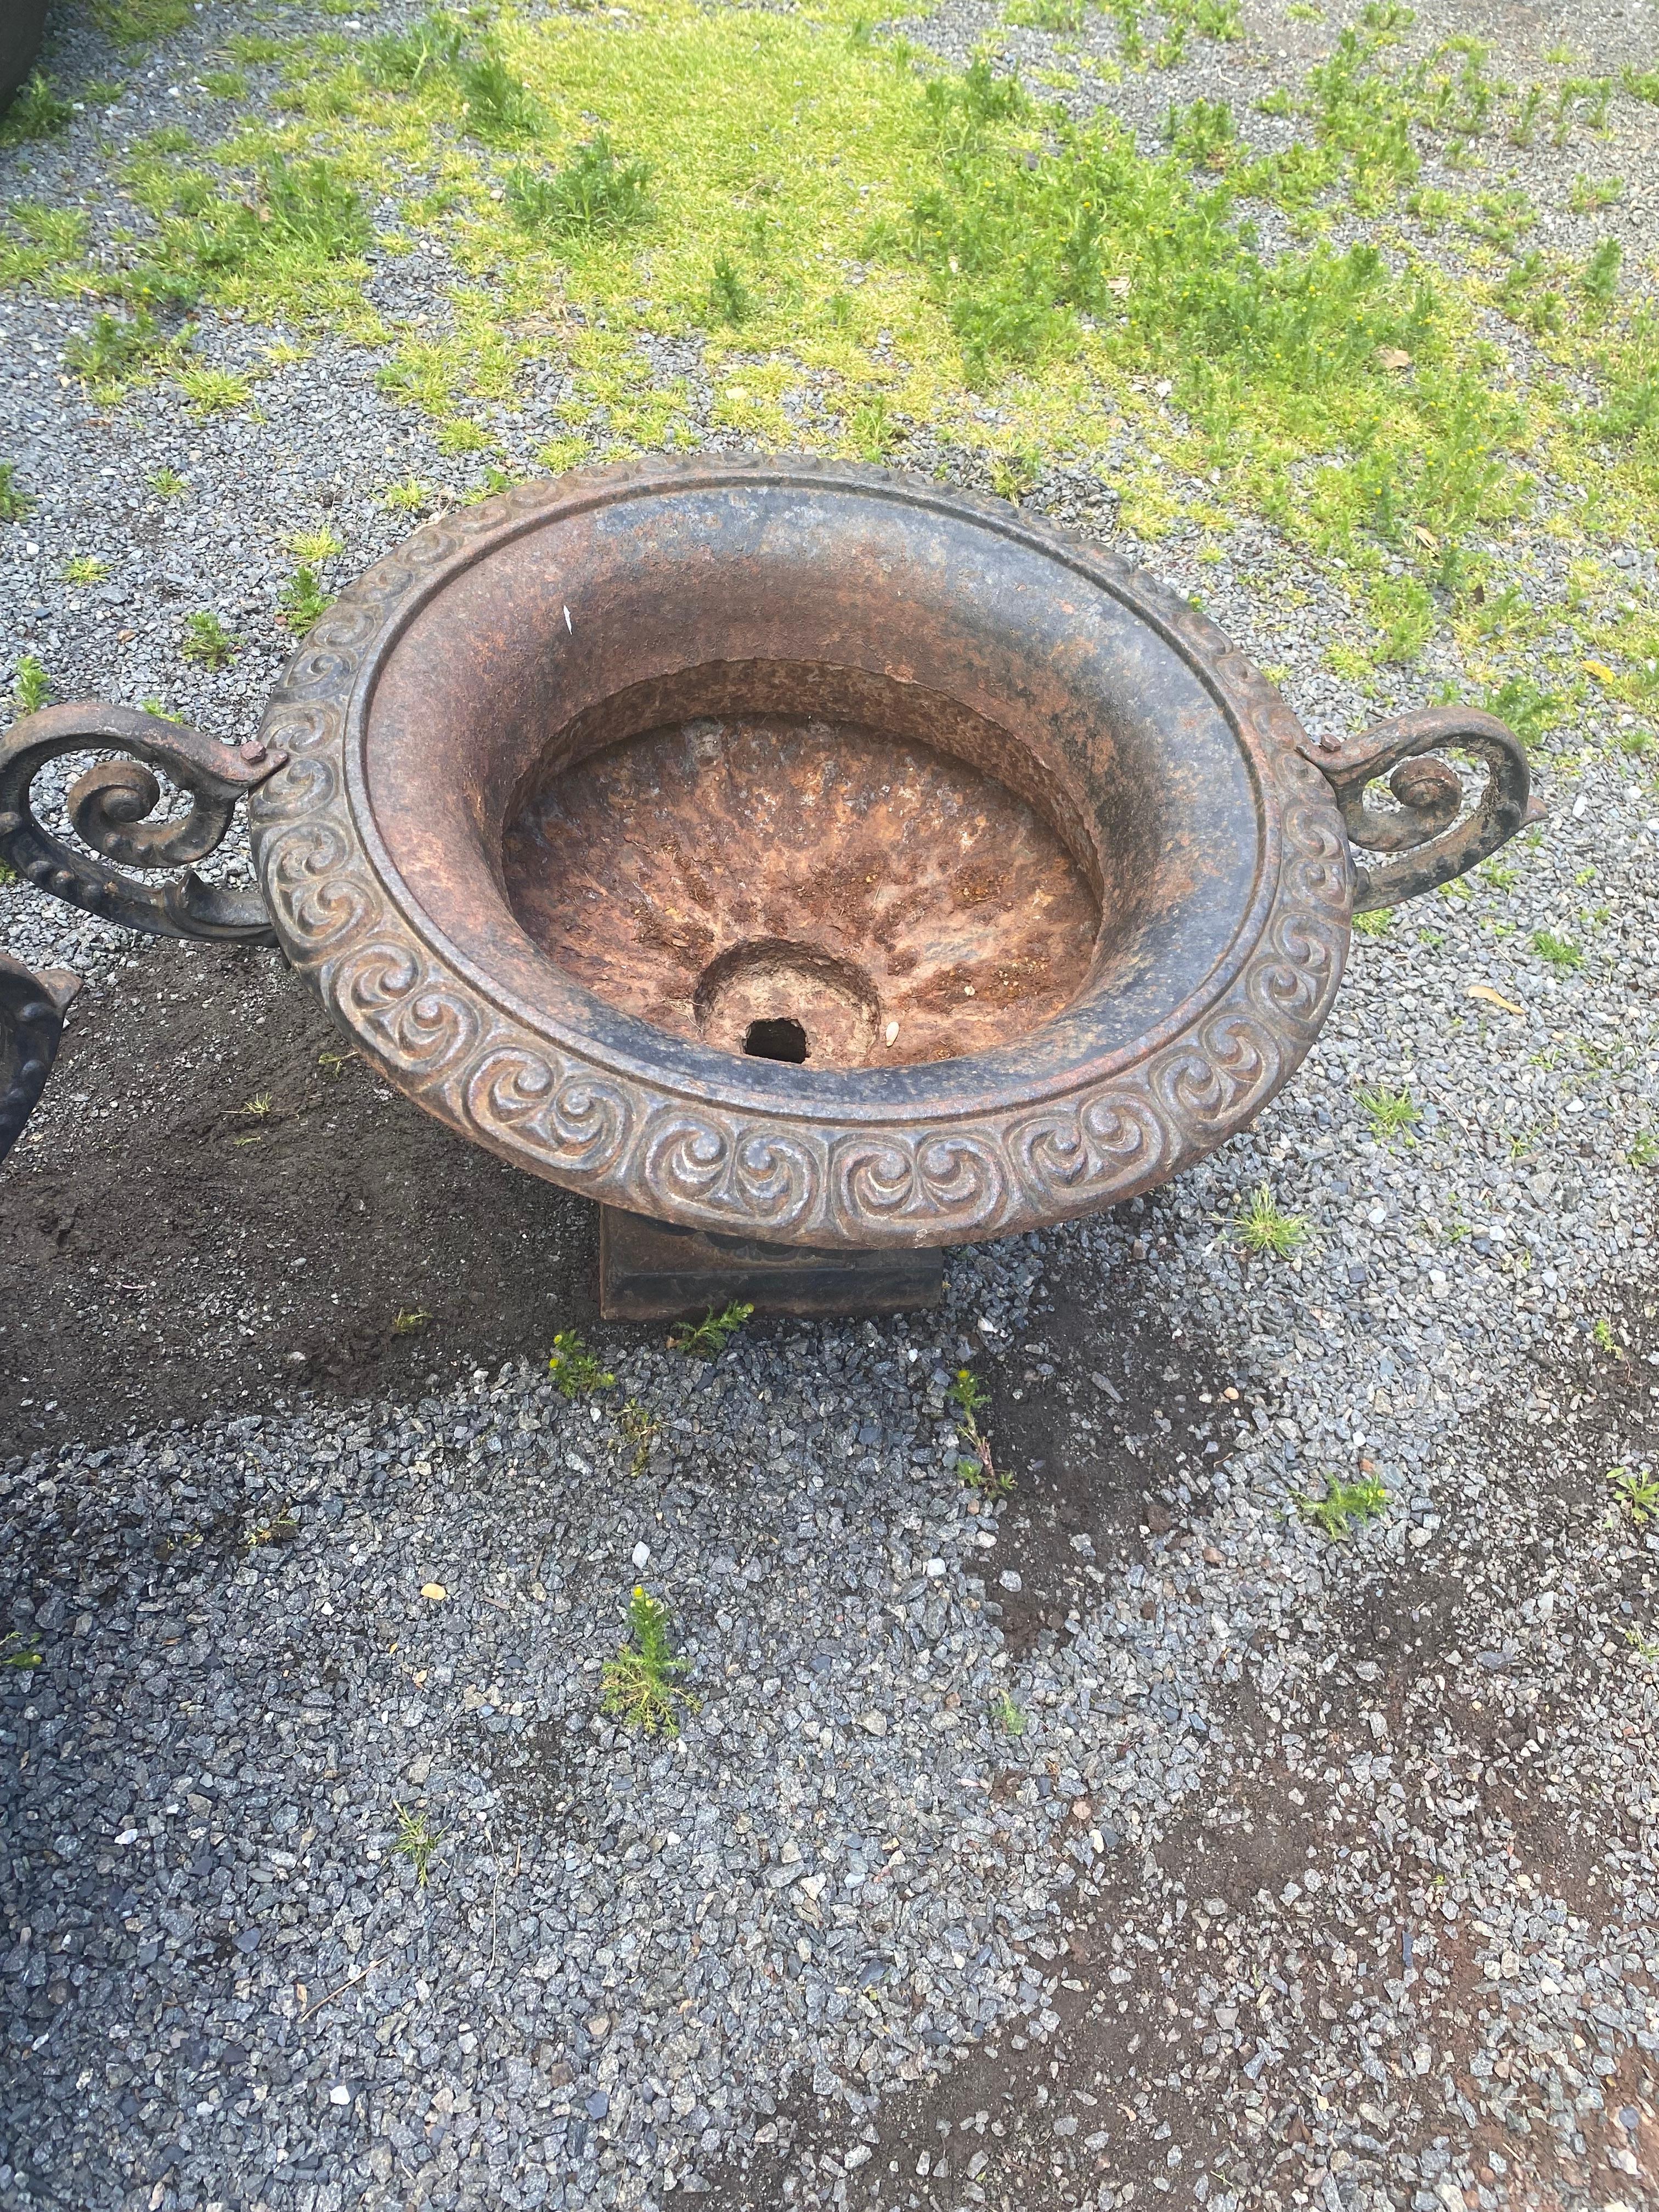 Beautiful pair of vintage cast iron planters having elaborate handles and neoclassical form and decoration.
35 w handle to handle
24 w outer edge of bowl
internal width is 14
(Dragert).